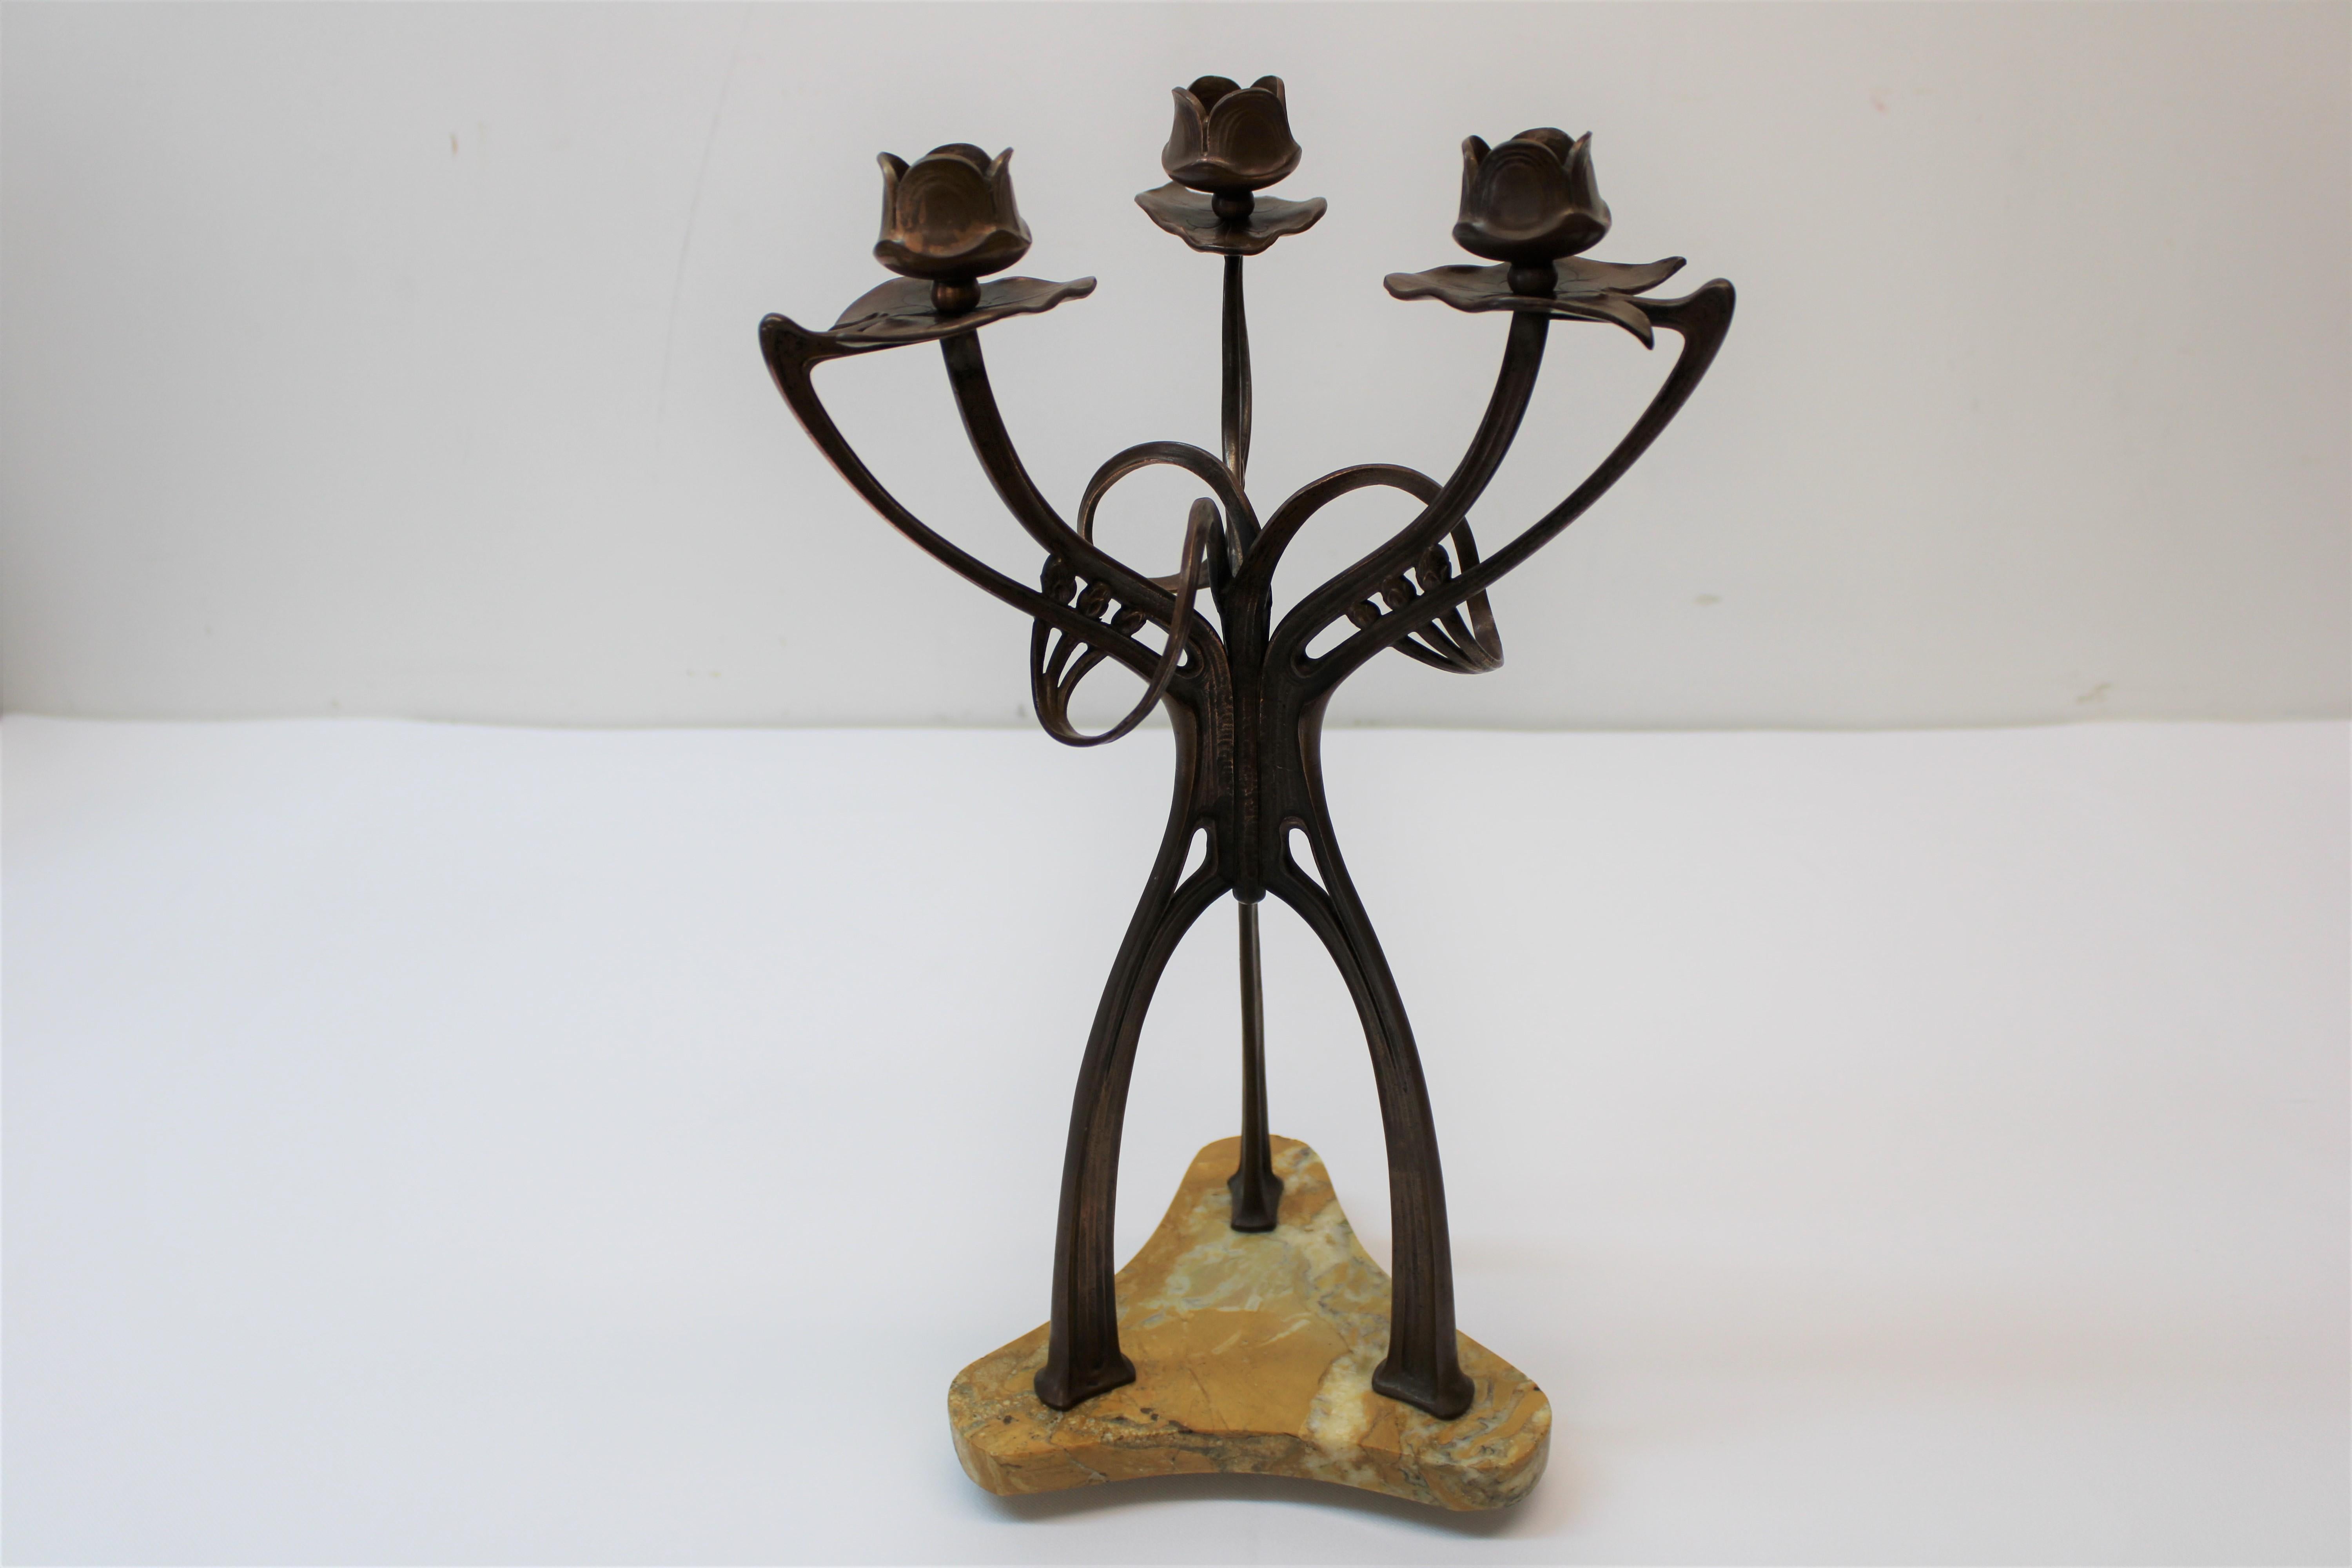 C. 1915 stunning 3 branch bronze Art Nouveau candle holders w/ marble bases are what homes are made of.
These floral looking tops that the candles sit in are adorable, with very sturdy bases let your candles set the mood in any room.